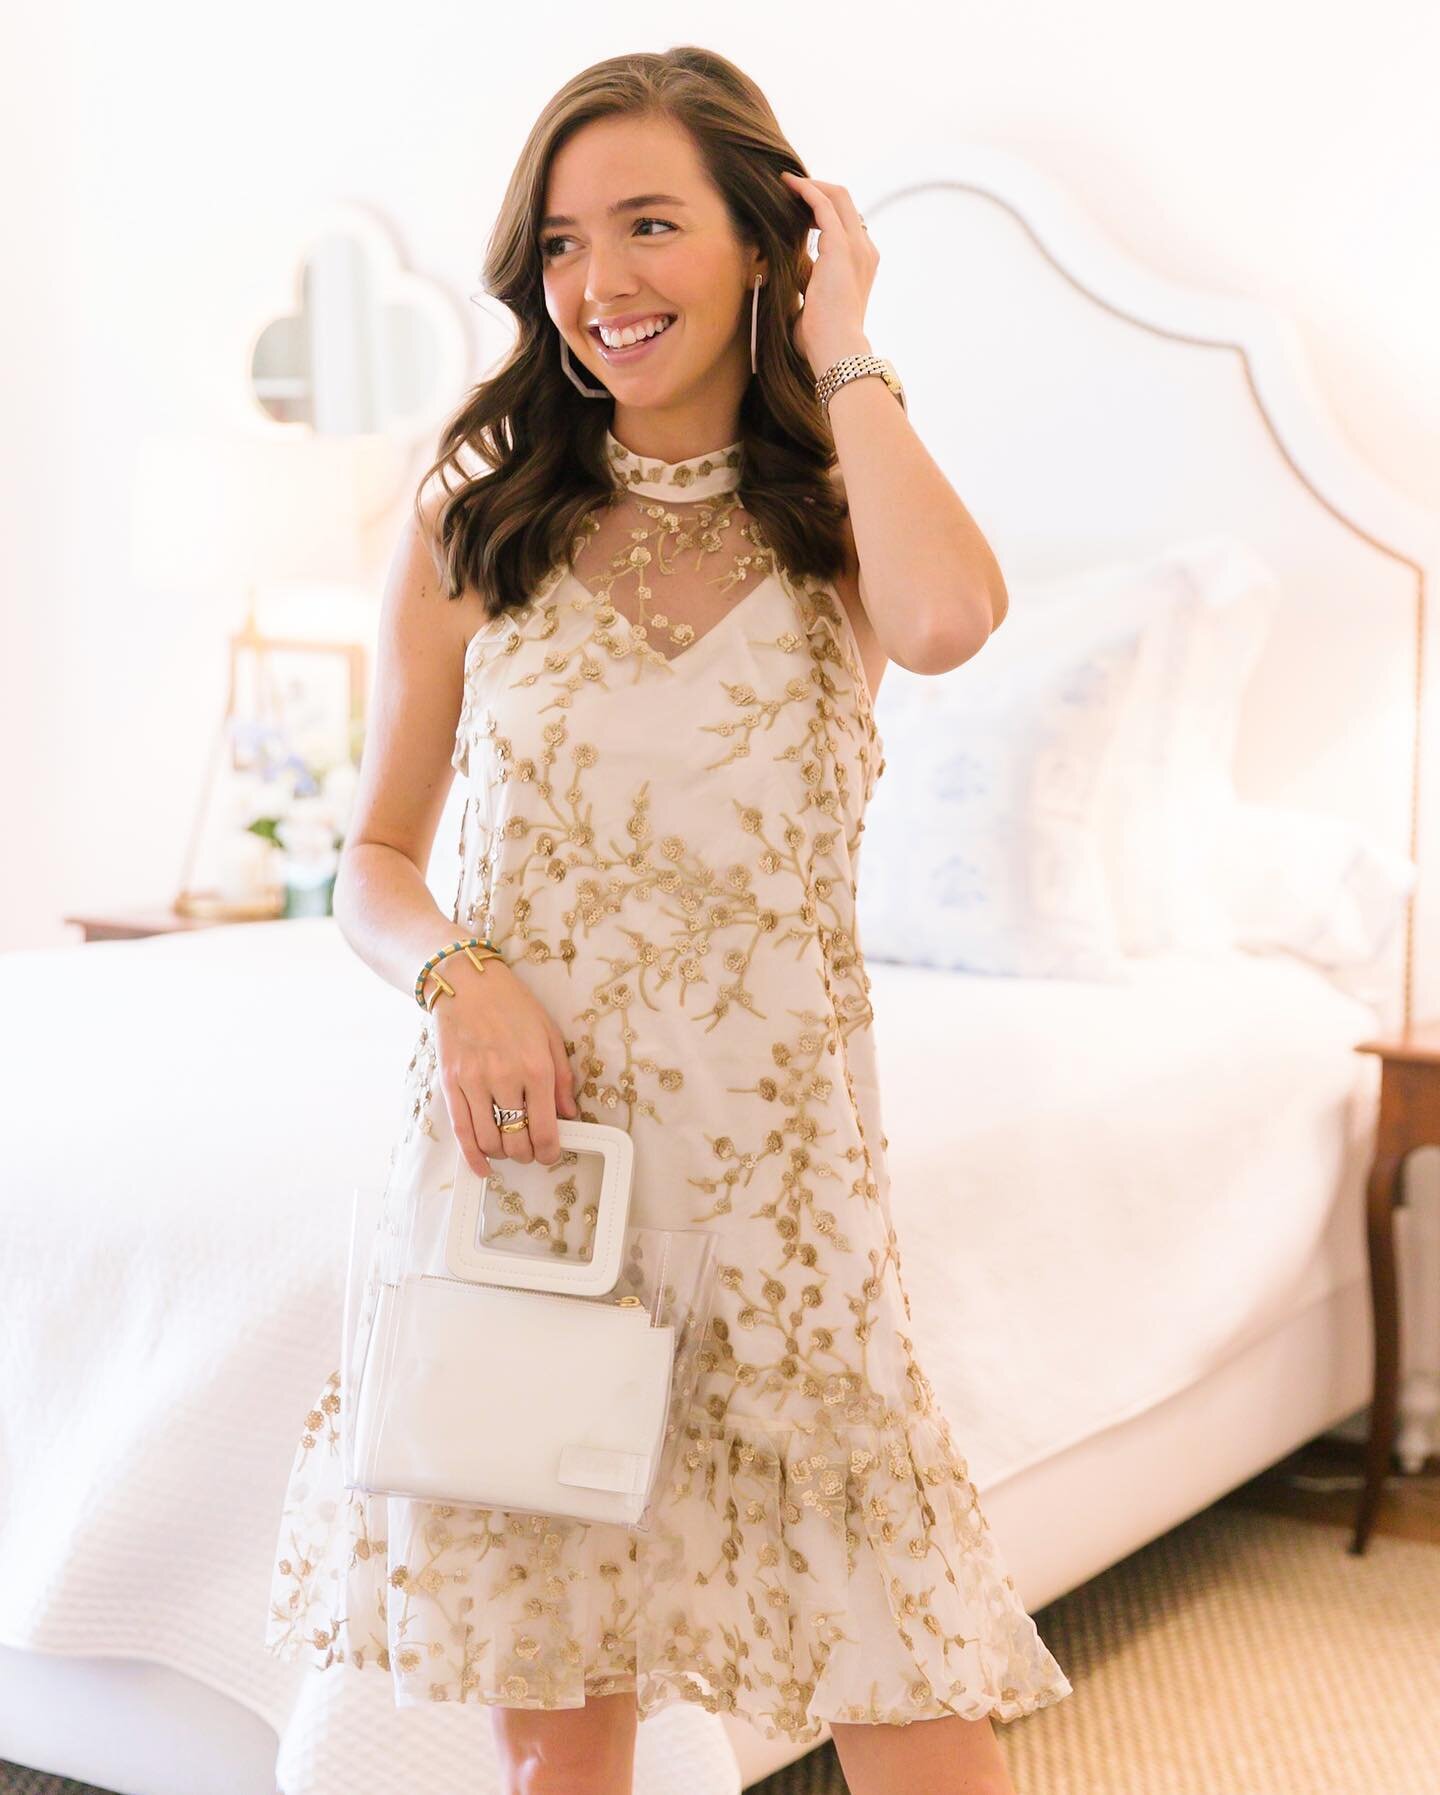 stepping out for a few special events this spring and SO excited about a few new finds from @juliebrownnyc 😍 love the shimmer of this dress- perfect for upcoming weddings, events, parties... and especially graduates looking for a special number to w